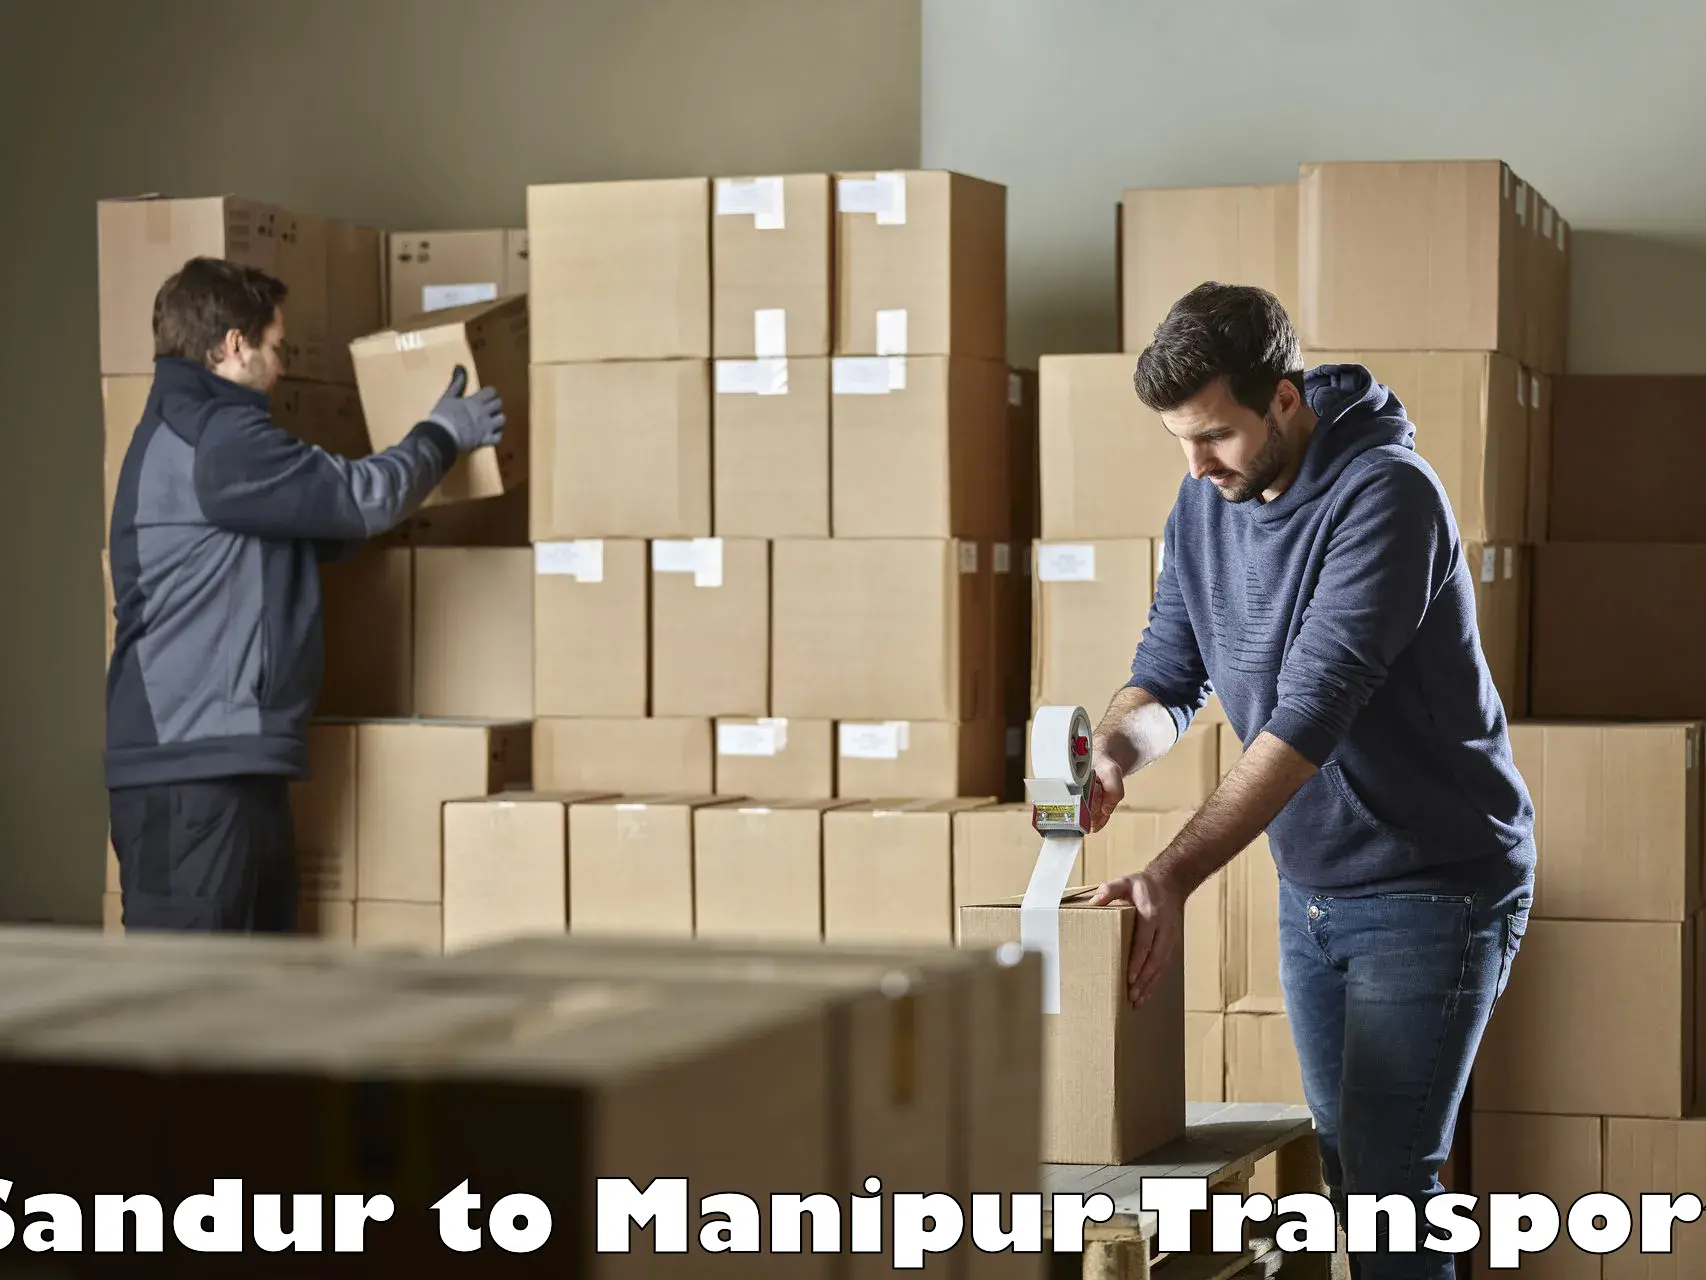 Commercial transport service Sandur to Manipur